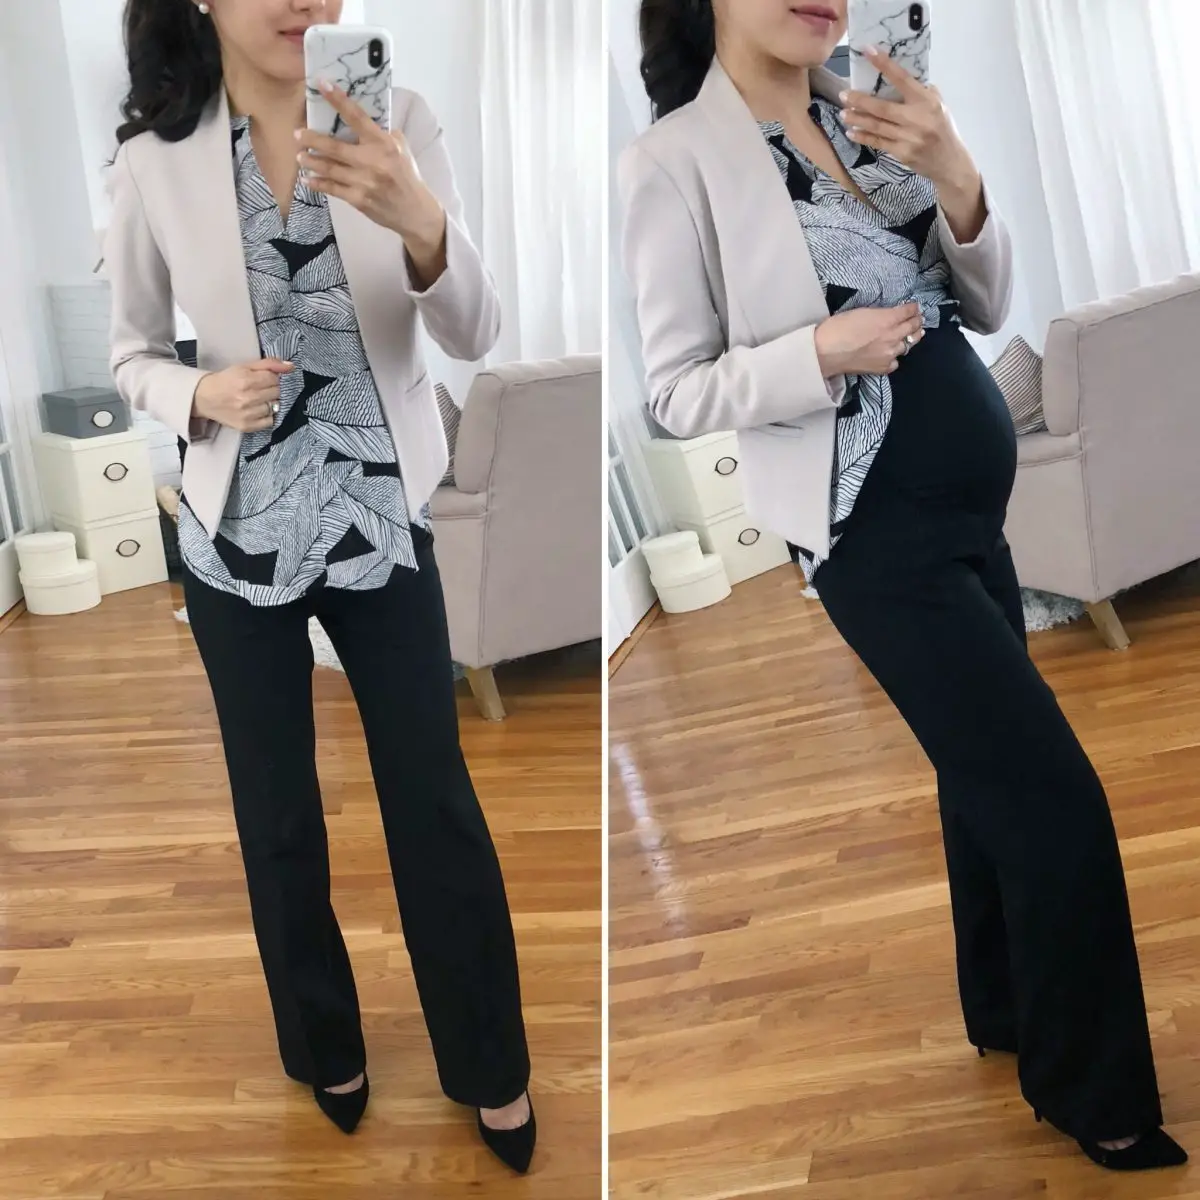 Work outfit ideas that hide a belly